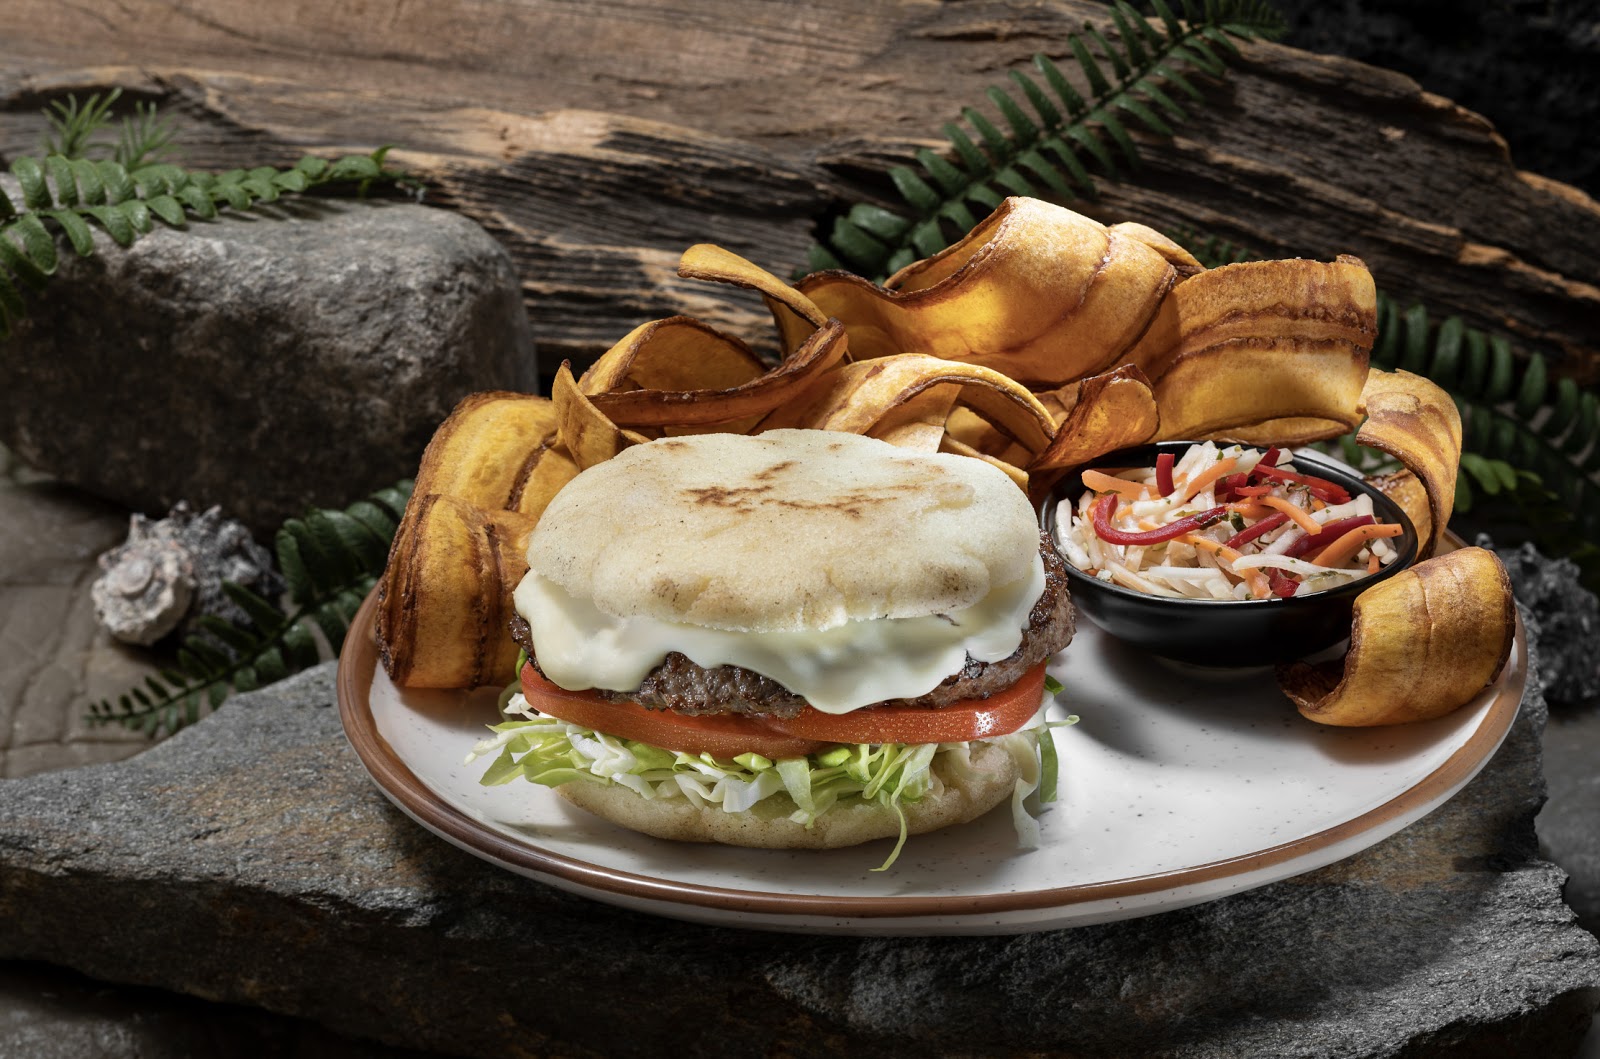 Take a First Look at New "Jurassic World" Food and Beverage at